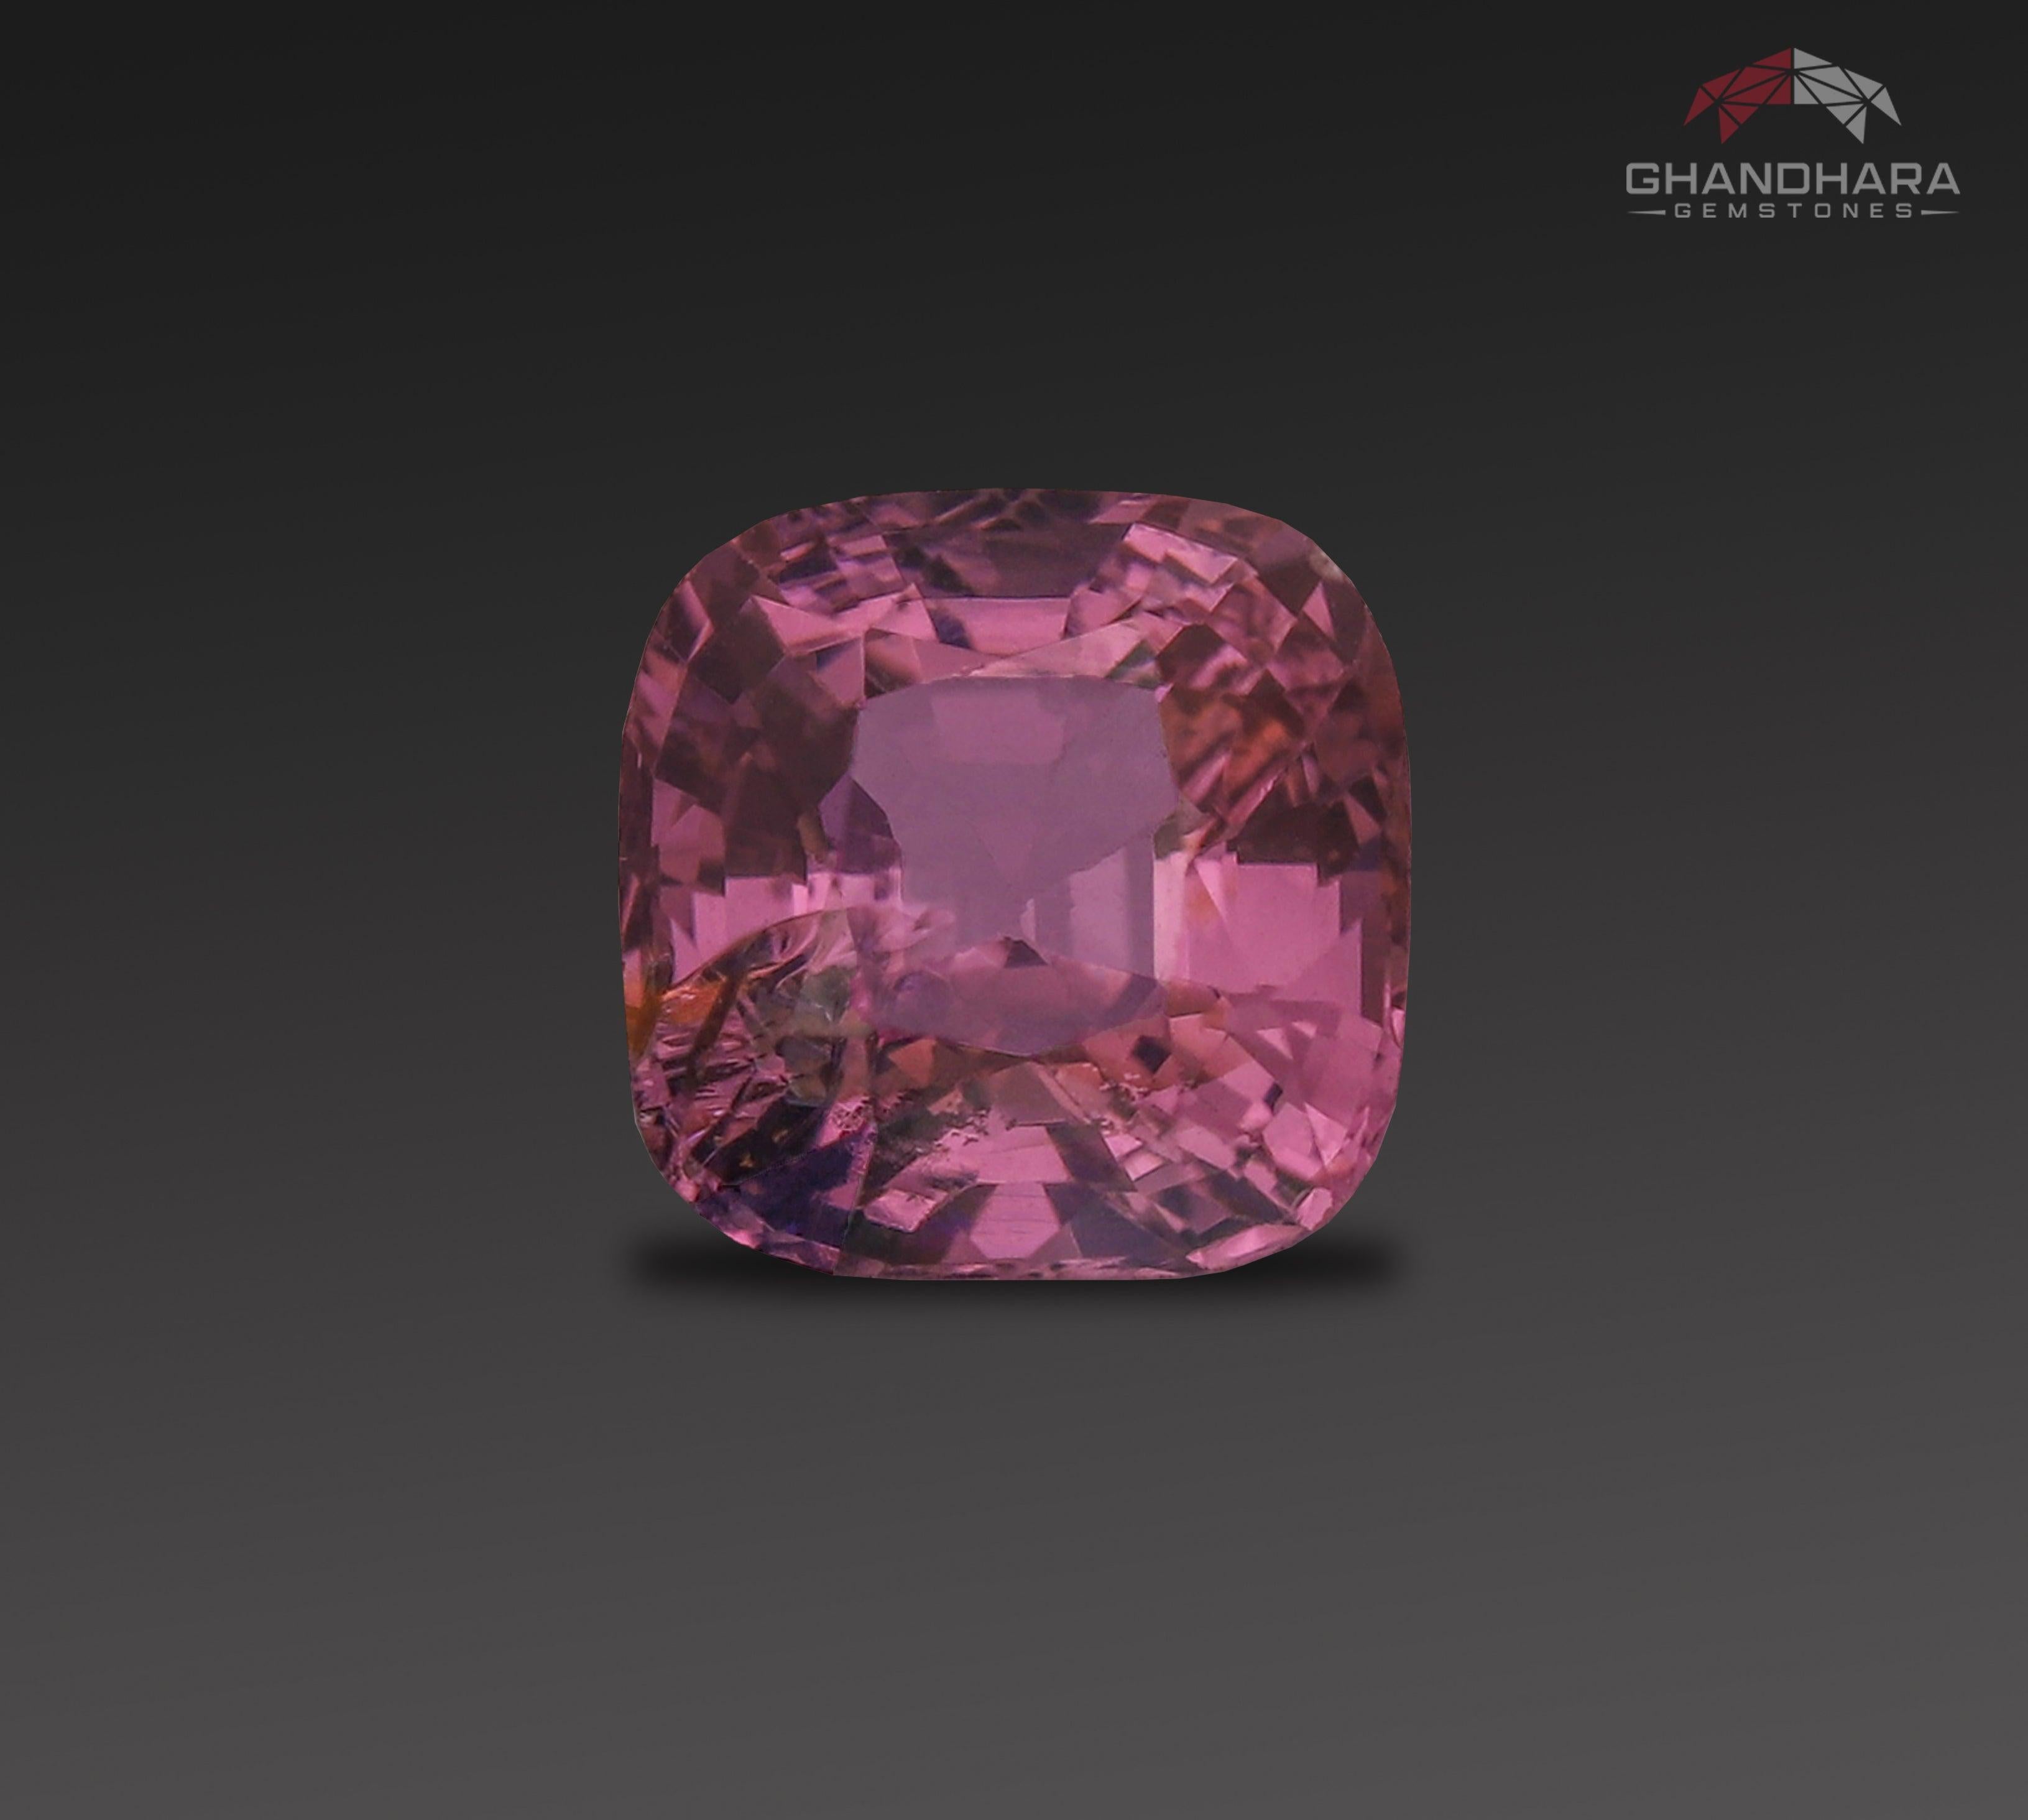 Hot Pink Natural Spinel Gemstone of 1.24 carats from Burma has a wonderful cut in a Square shape, incredible pink colour. Great brilliance. This gem is Included.

Product Information:
GEMSTONE TYPE:	Hot Pink Natural Spinel Gemstone
WEIGHT:	1.24